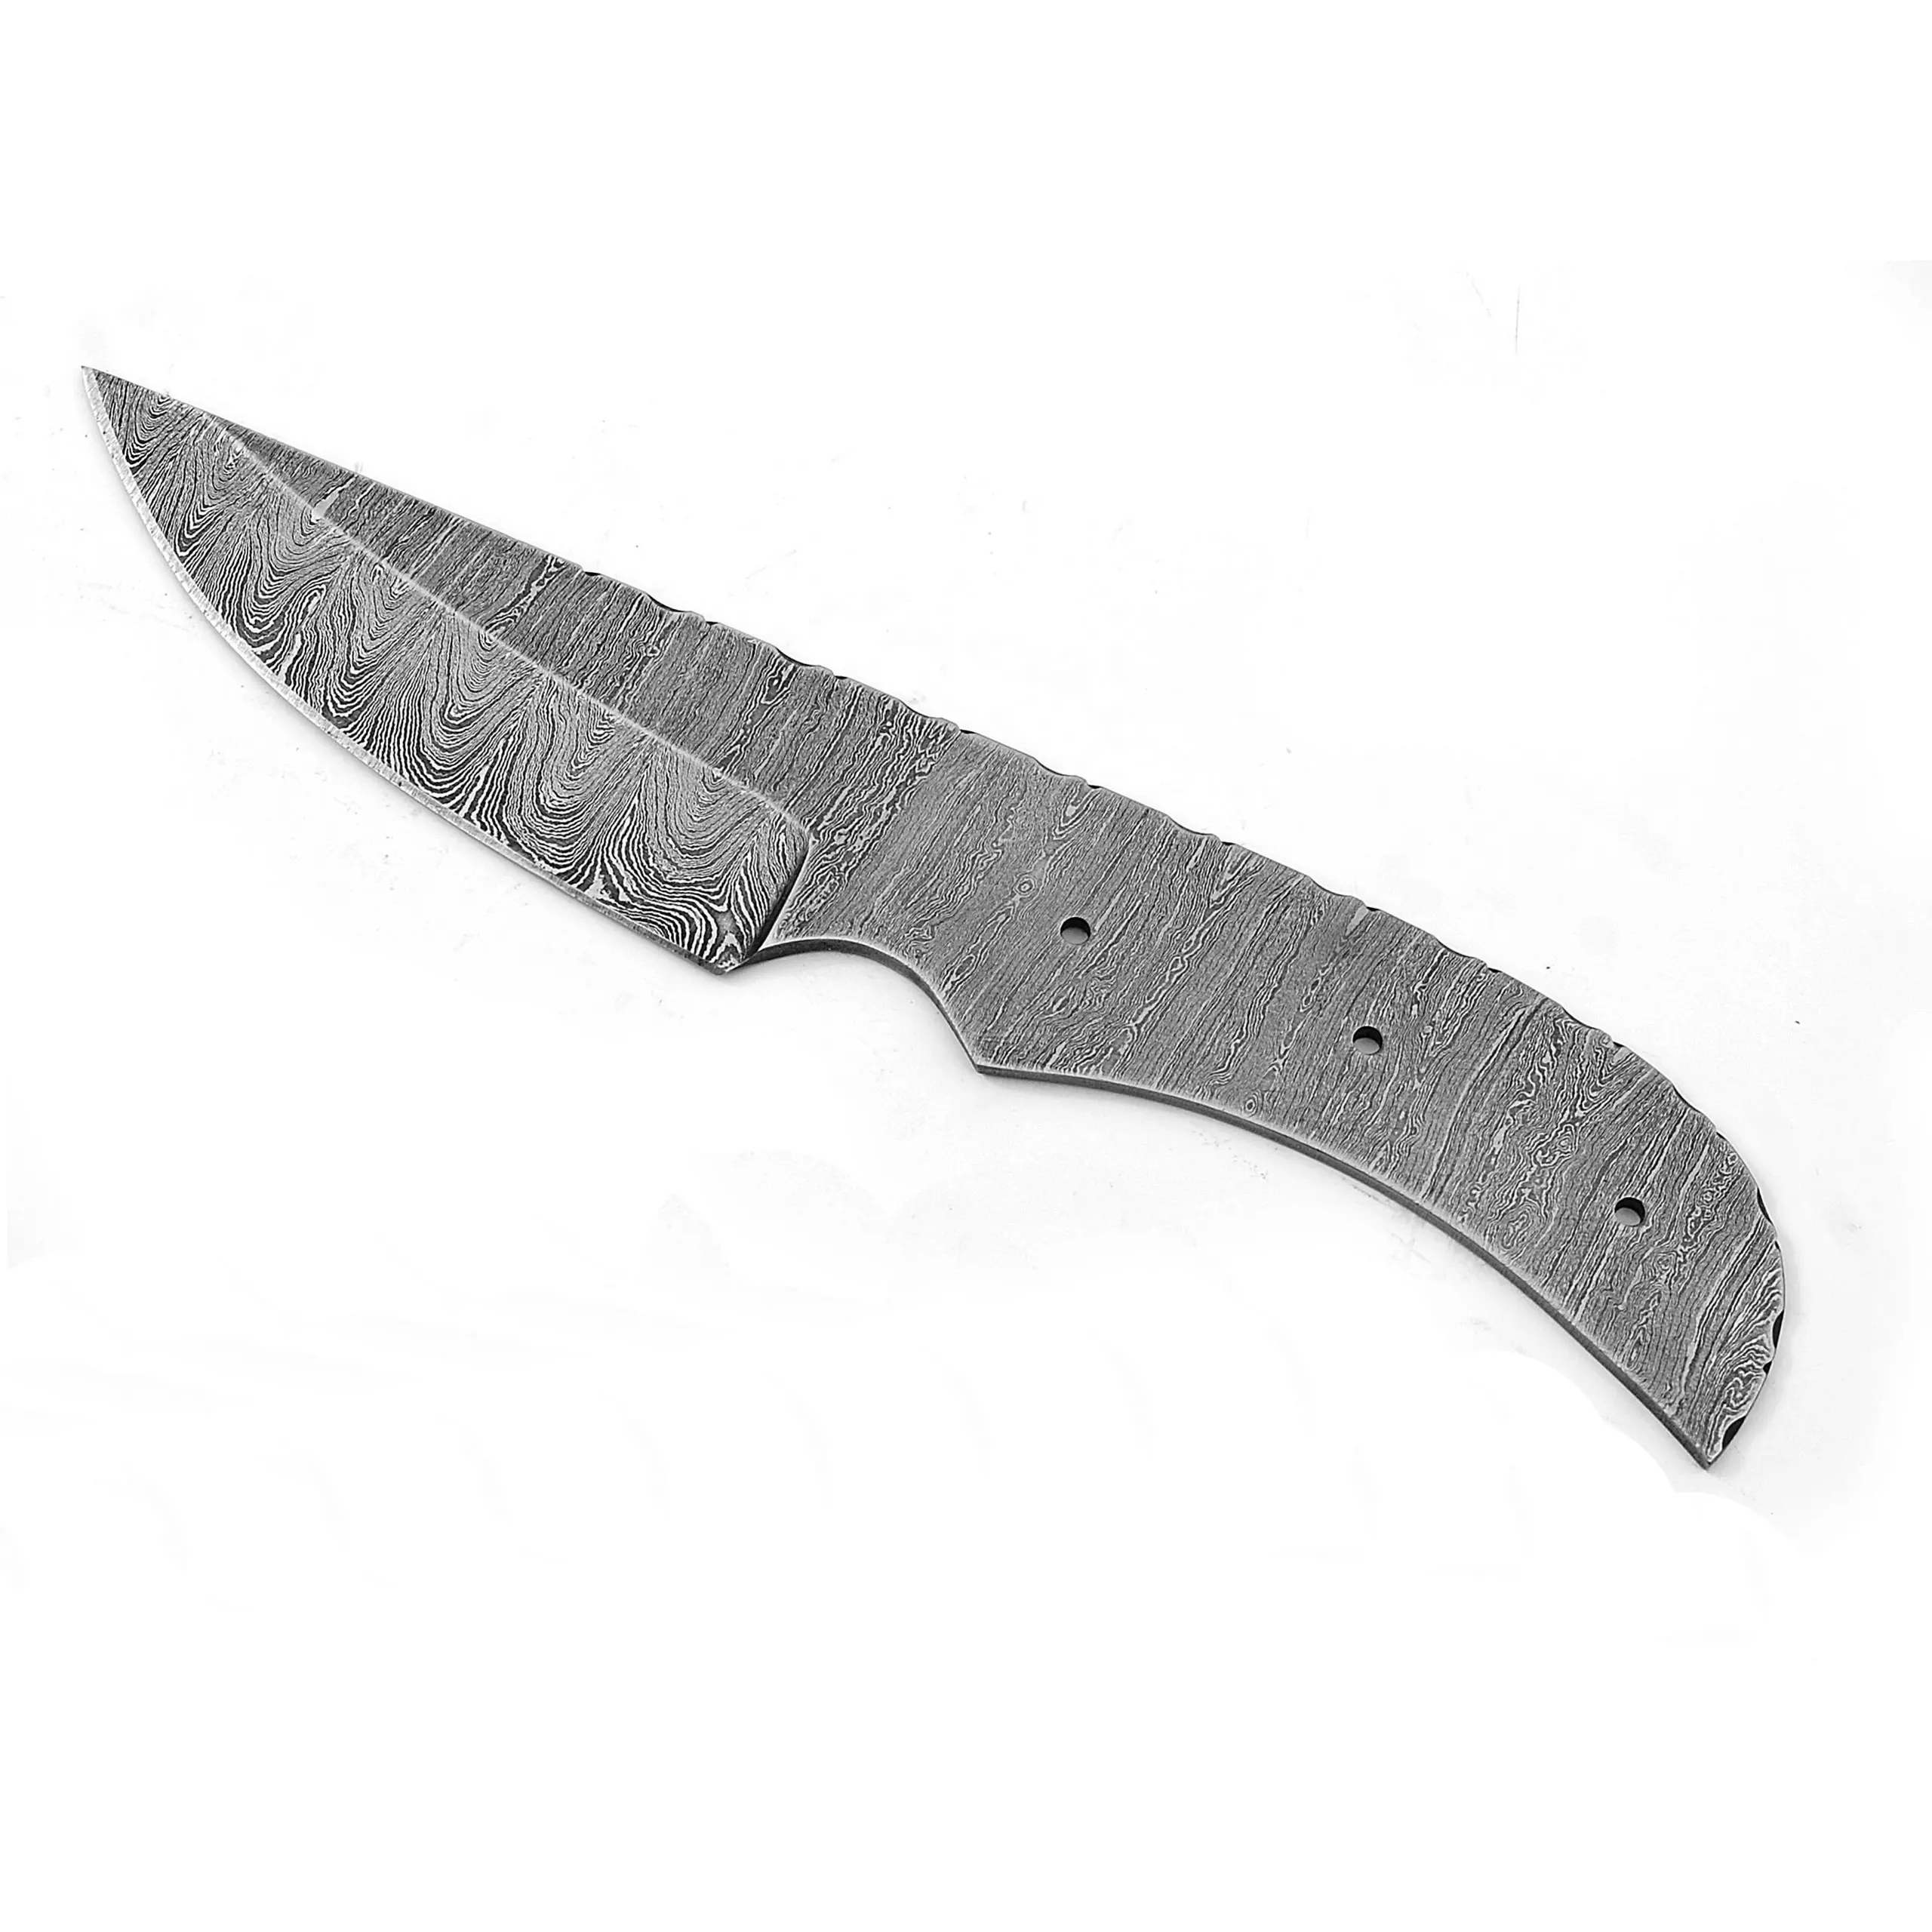 Hot Selling Hand Forged Damascus Steel Blank Blade Skinner Knife Making Supplies